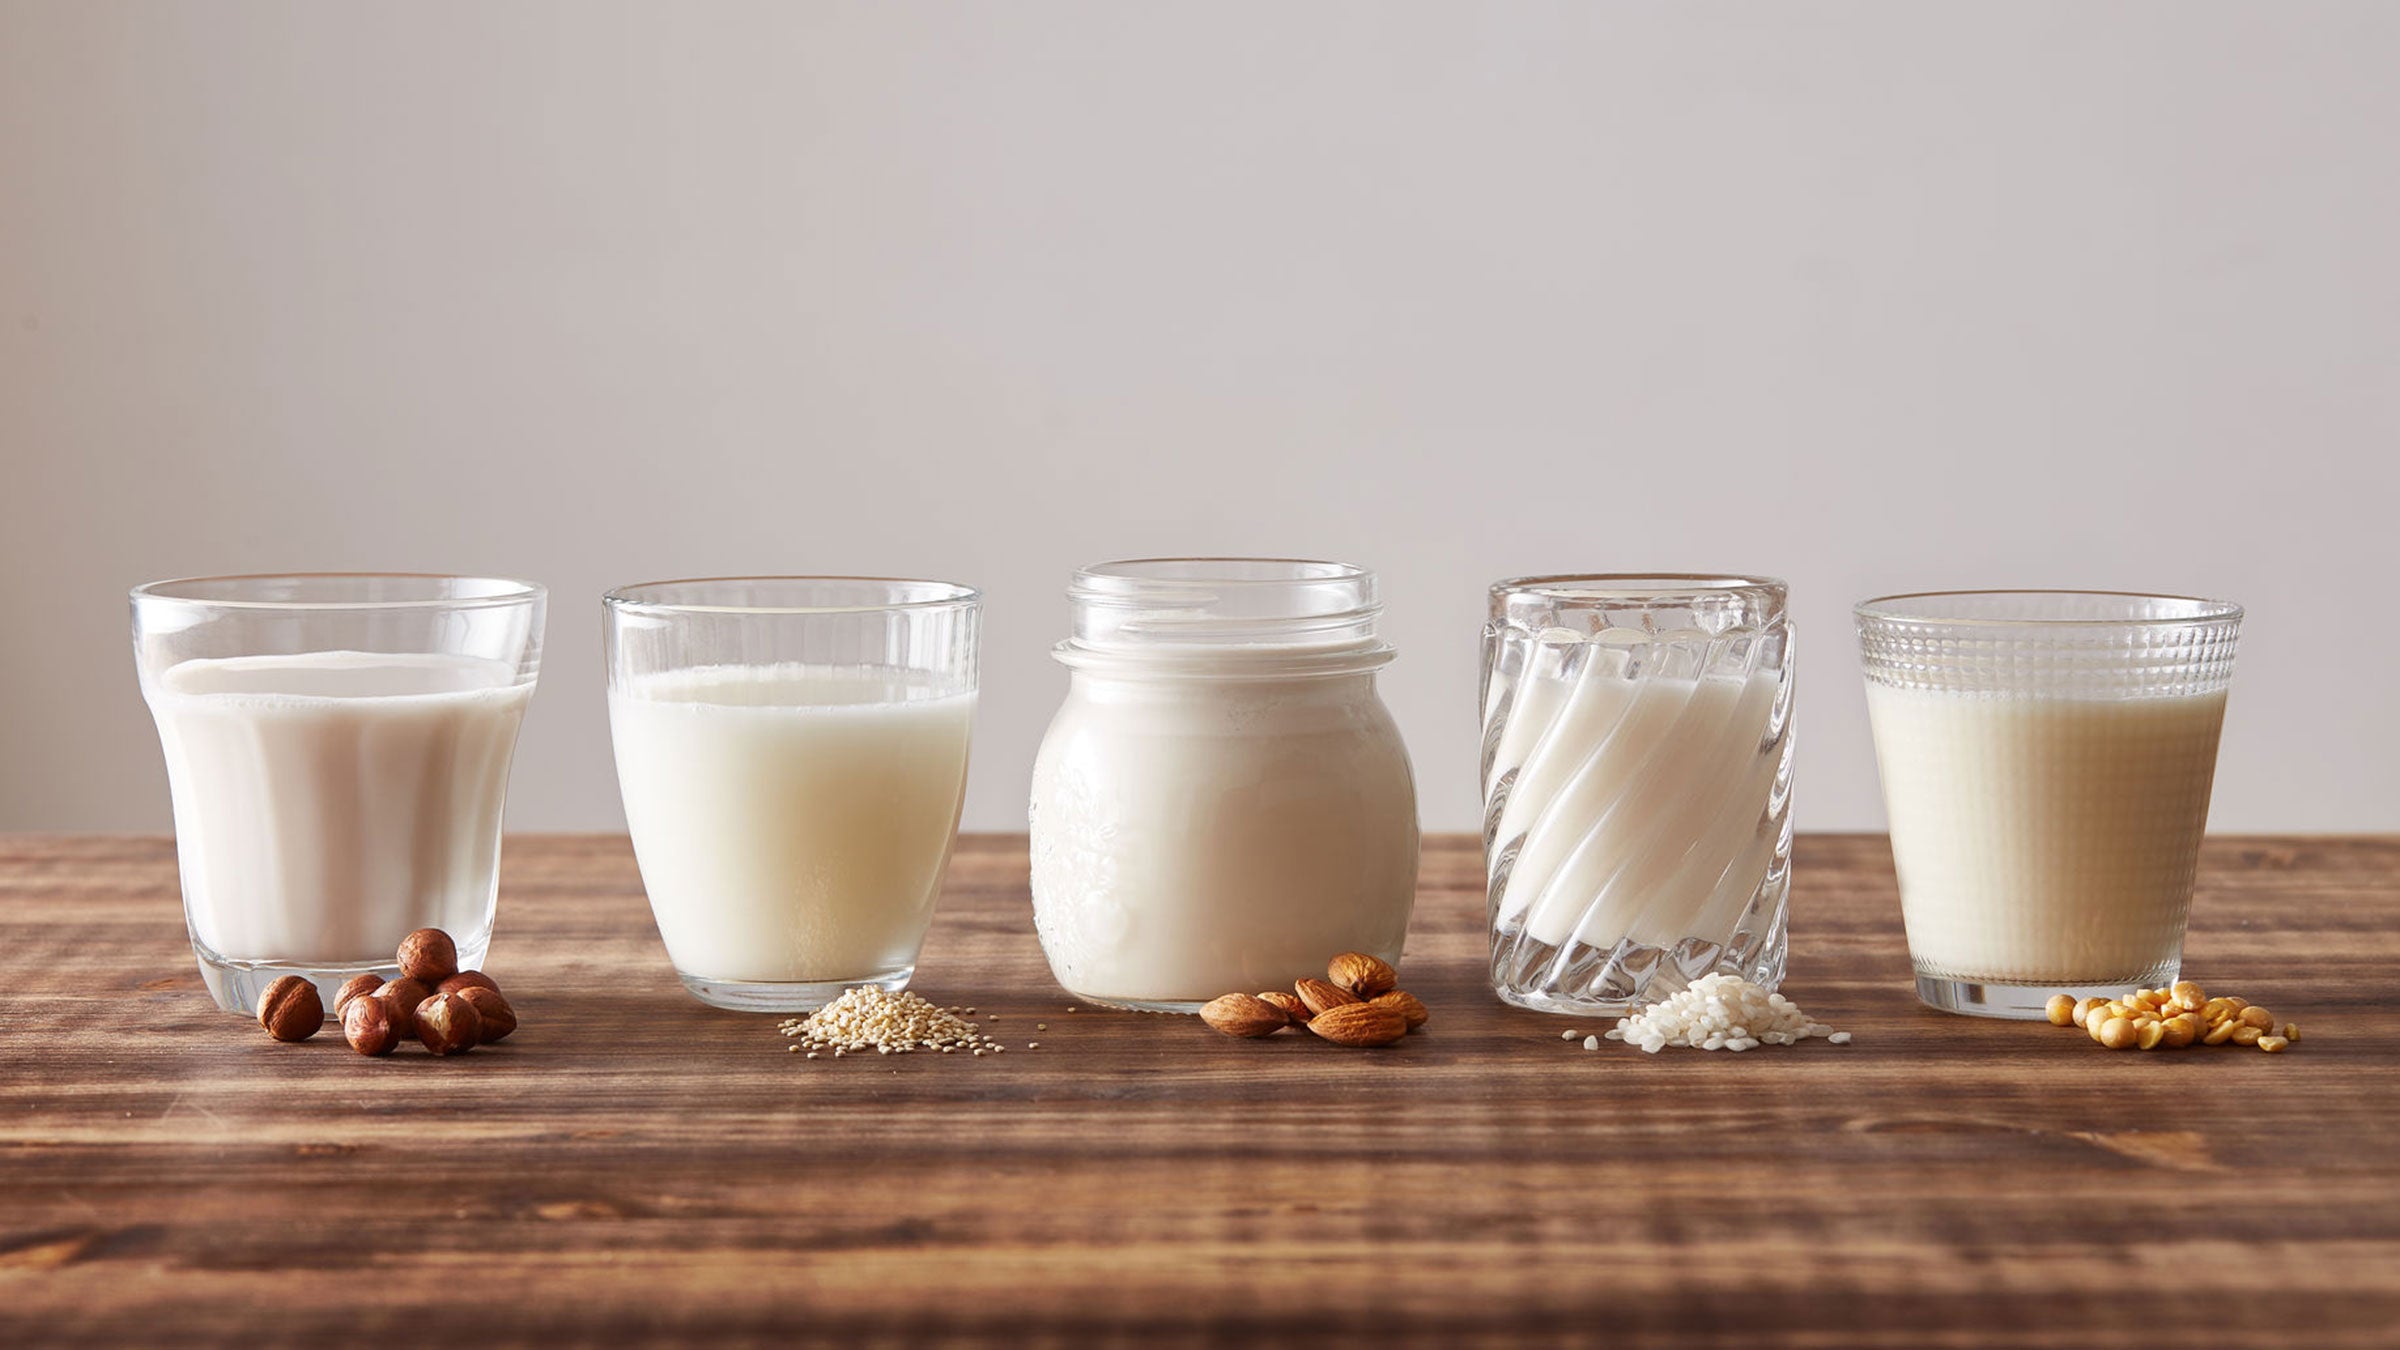 Pocket-friendly dairy choices